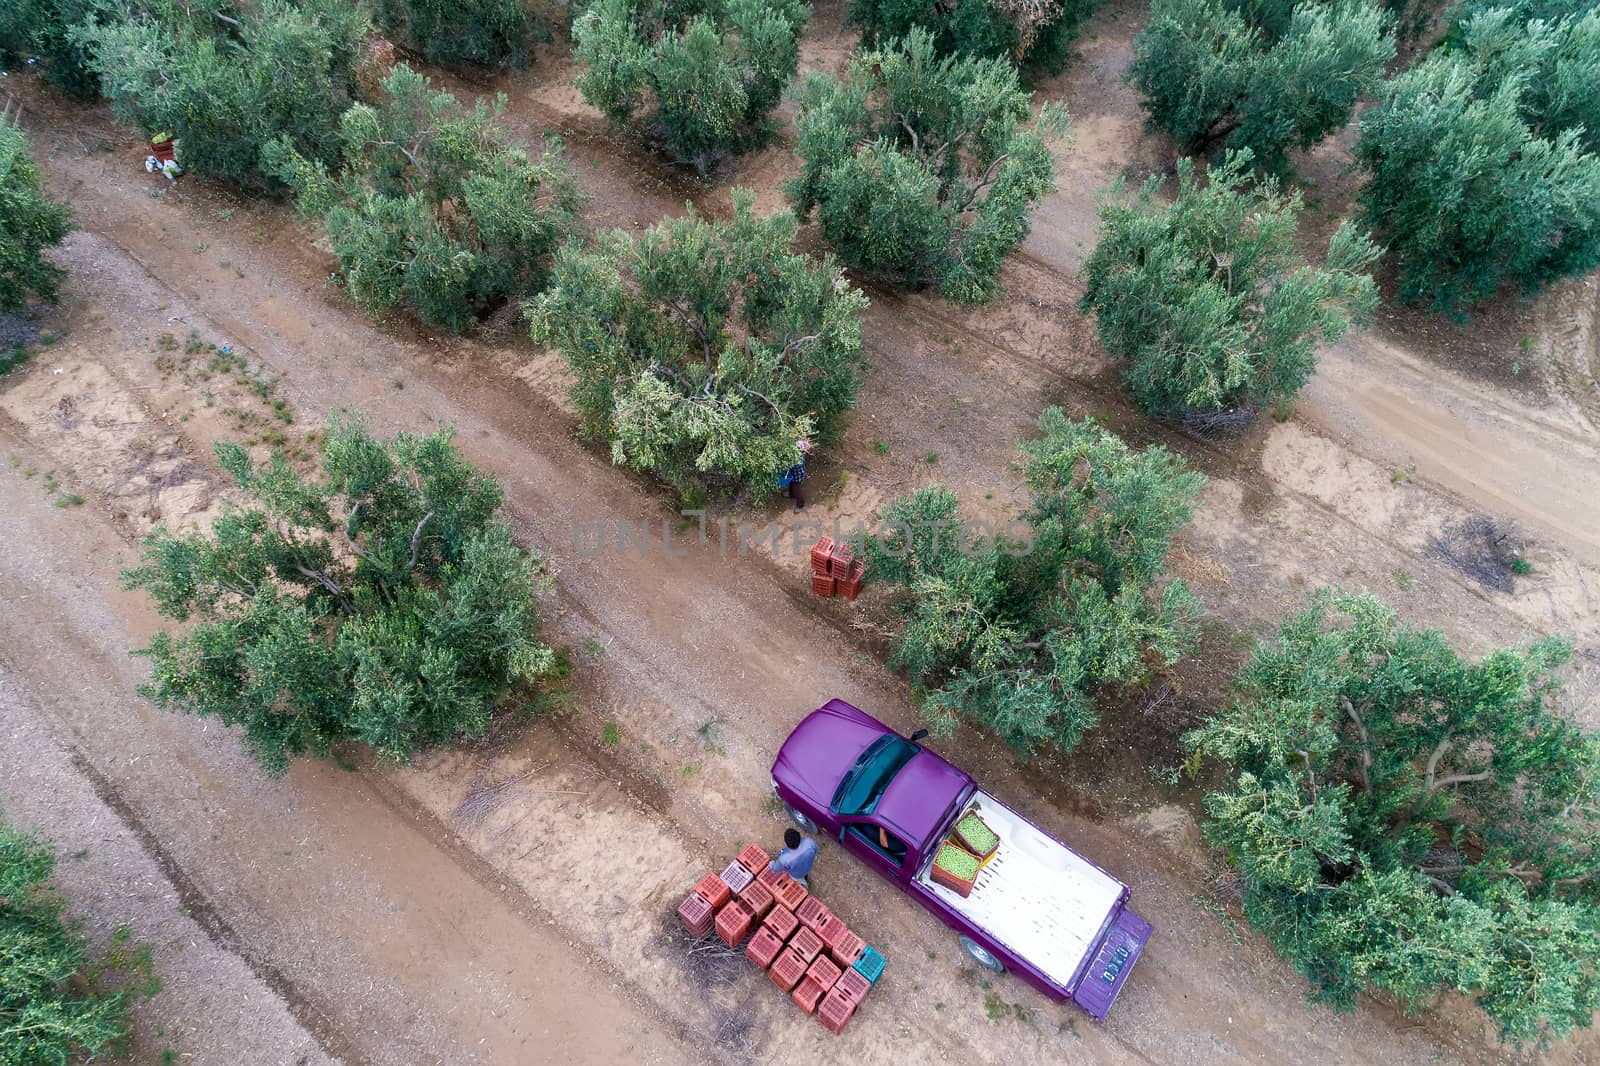 Olives harvesting in a field in Chalkidiki,  Greece